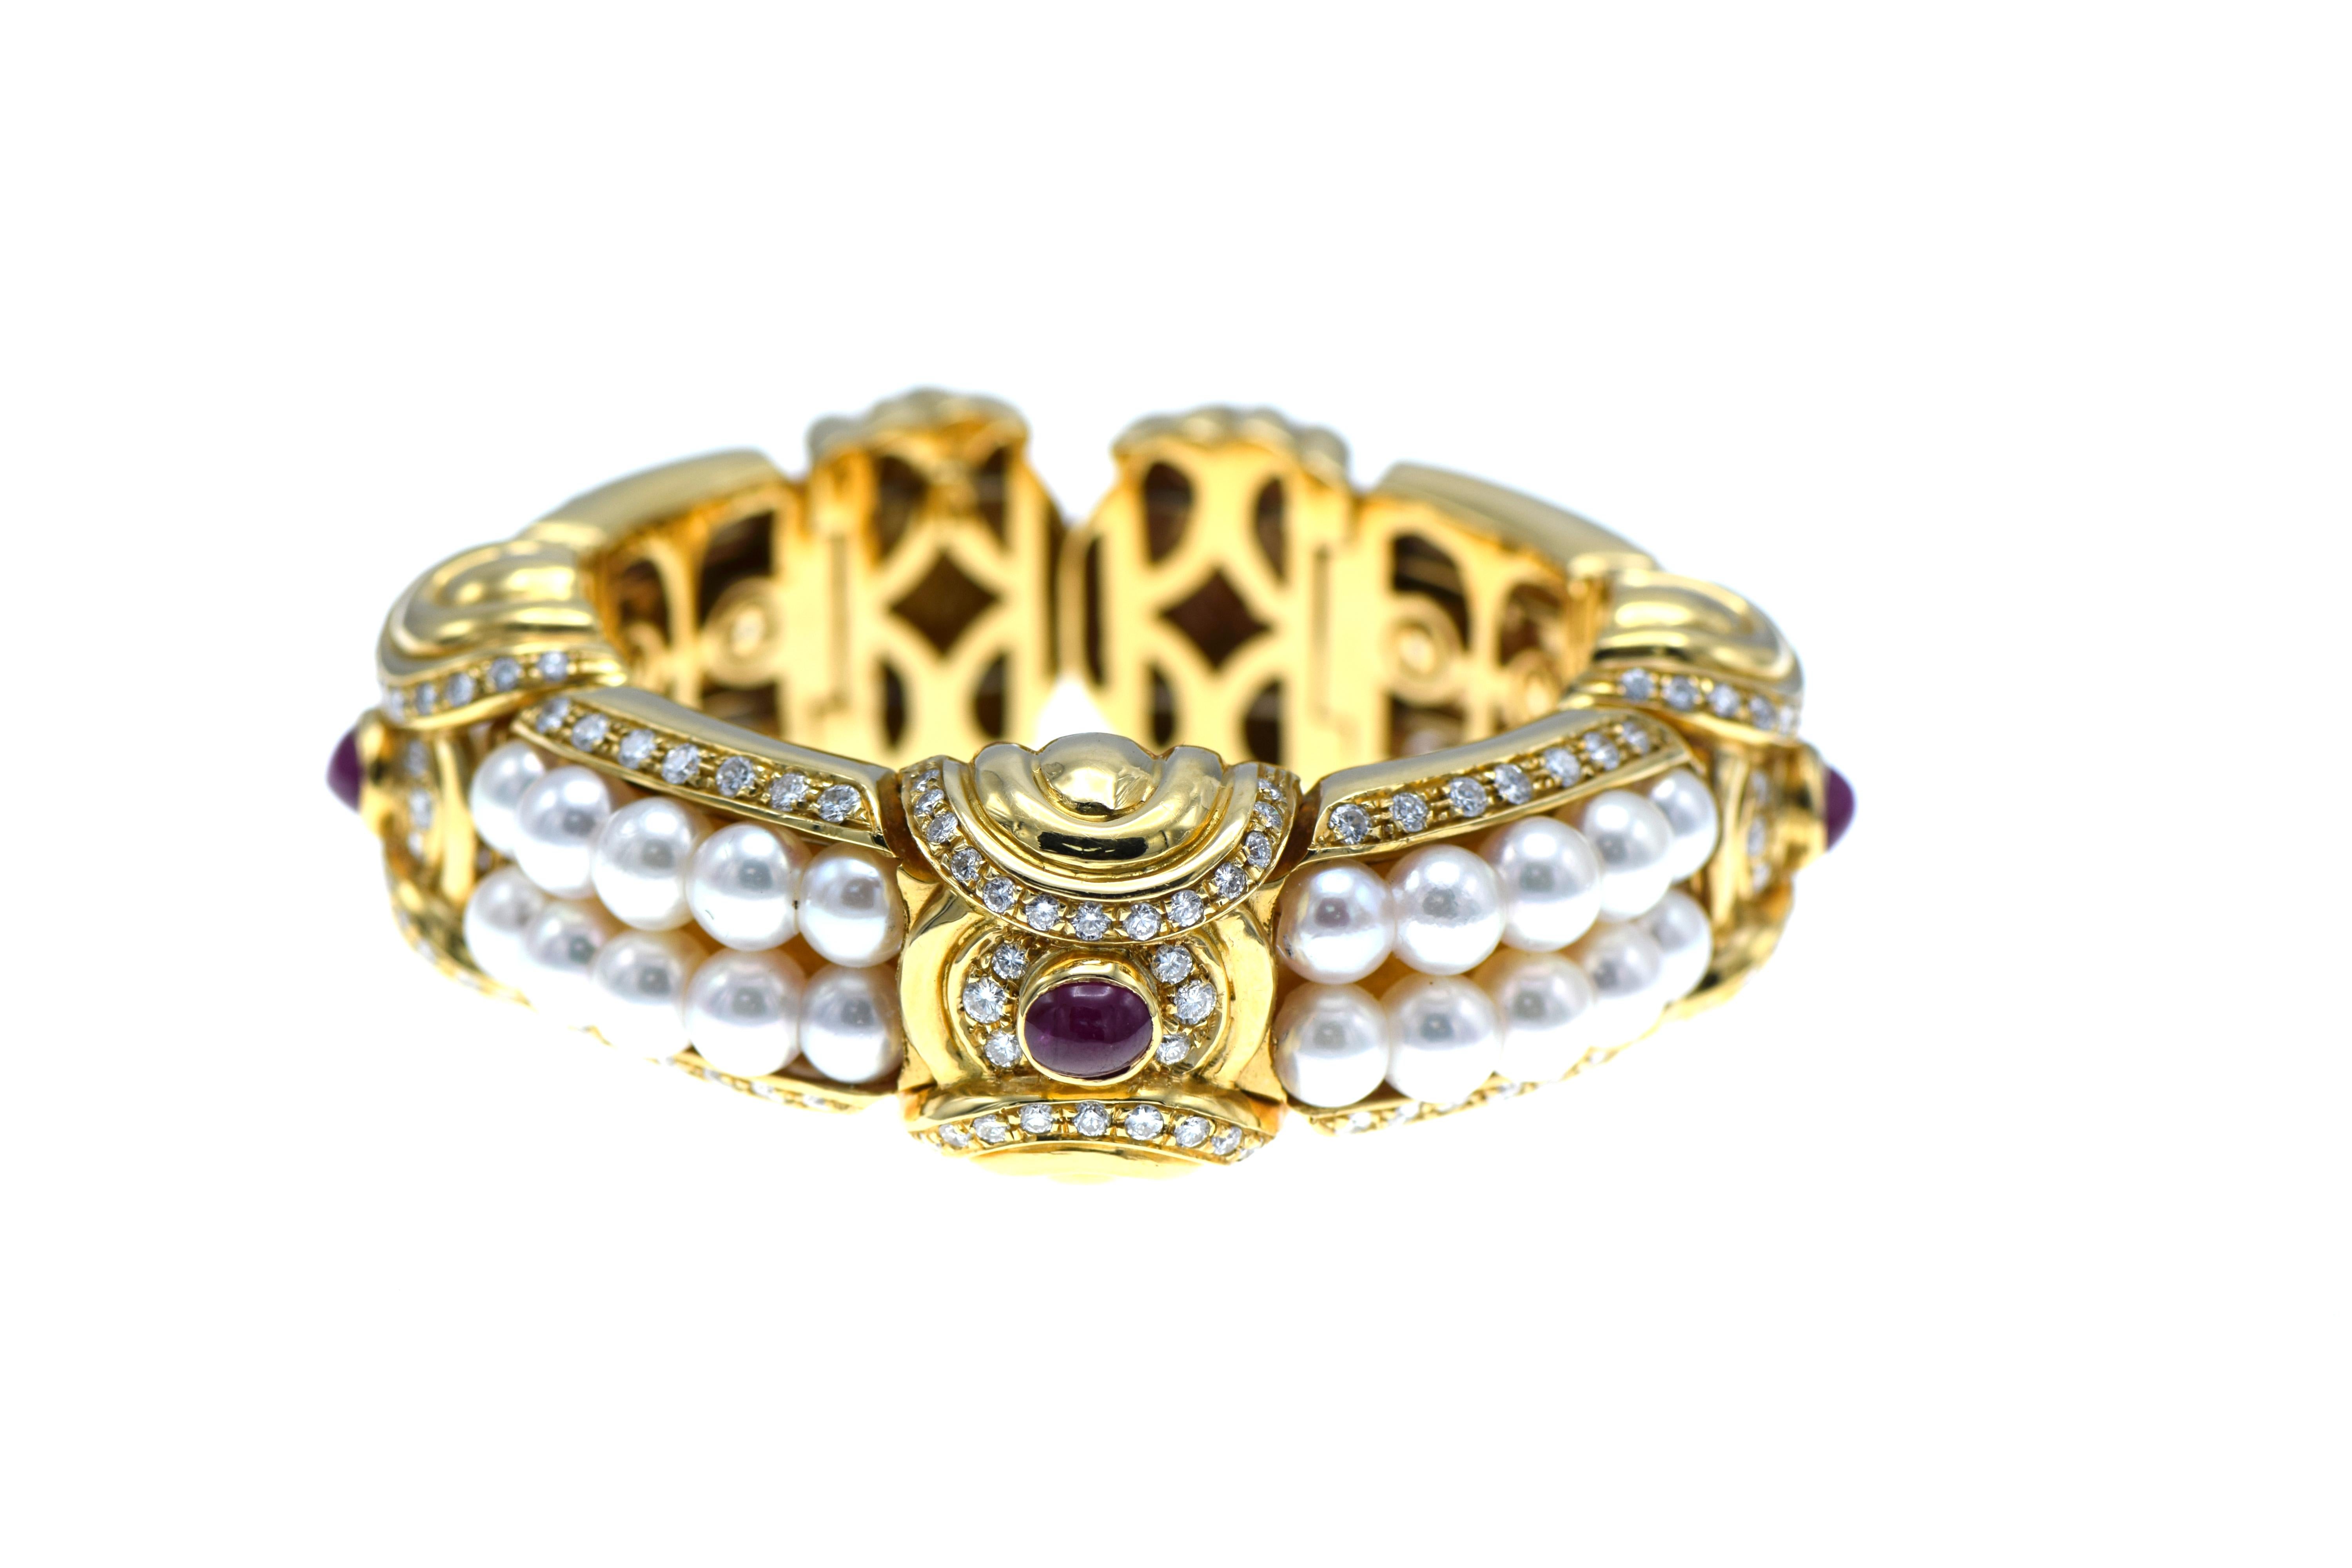 Crafted in 18 karat yellow gold, expandable cuff bracelet in the style of Bulgari.  Featuring 3 oval cabochon cut rubies 152 round brilliant cut diamonds and 40 cultured pearls, 6-6.50mm of fine quality, very slightly blemished, very high luster and